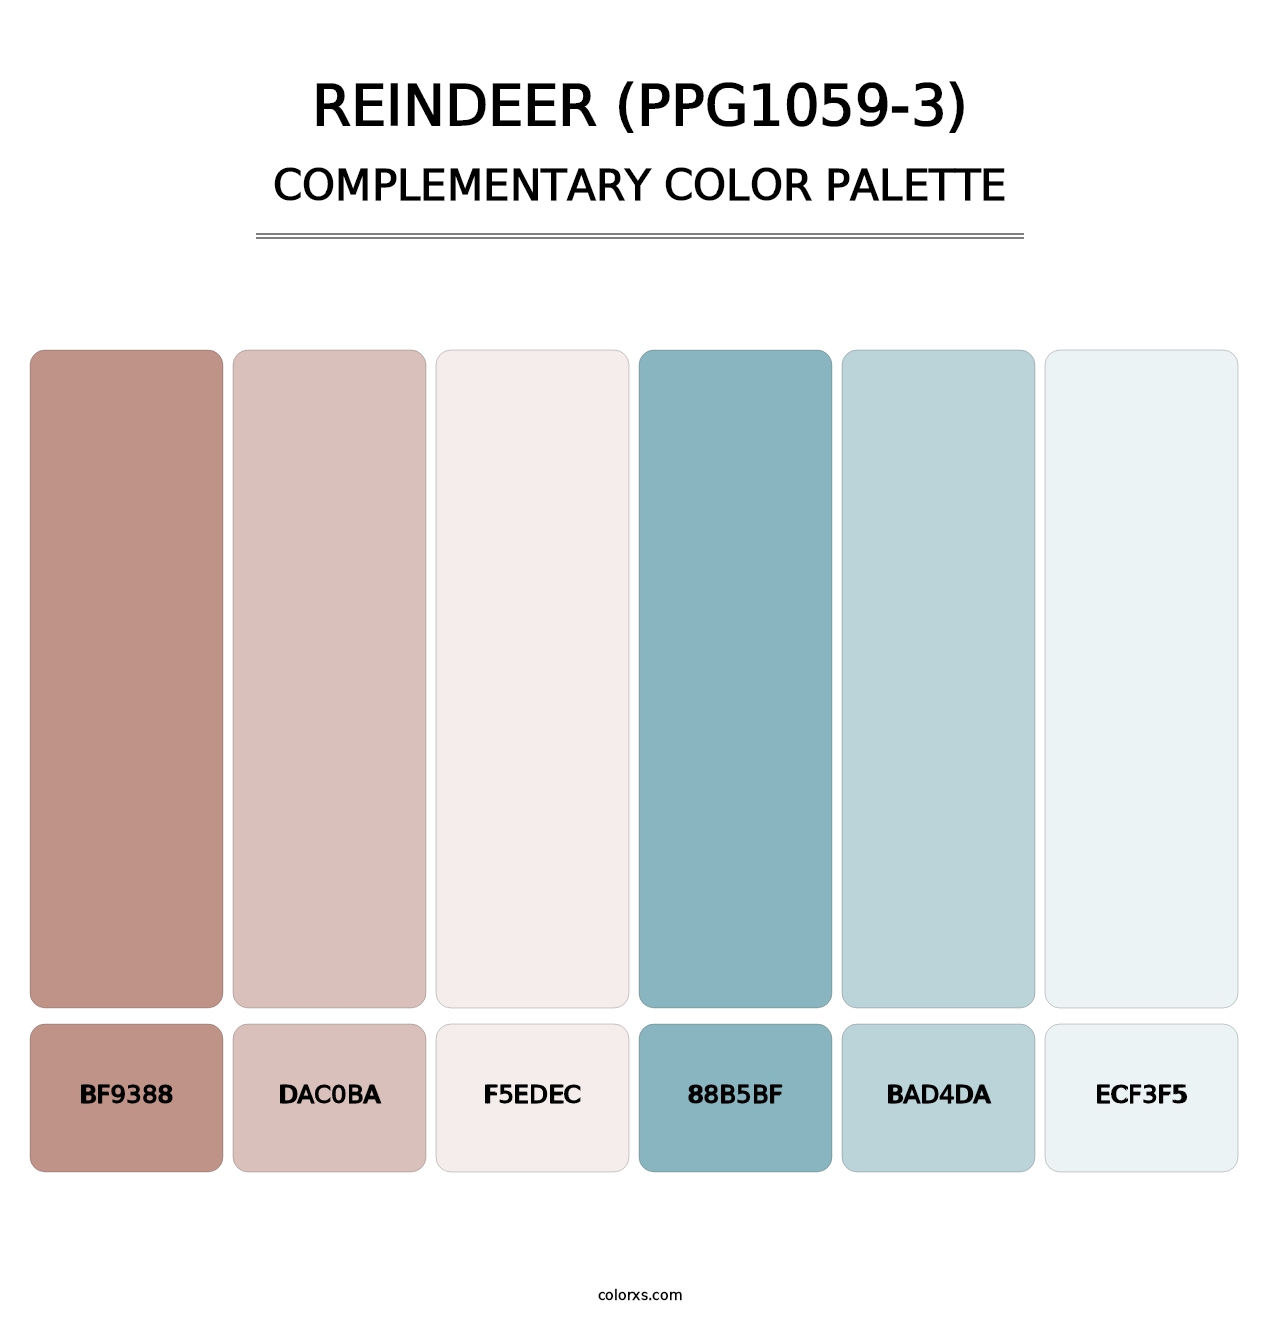 Reindeer (PPG1059-3) - Complementary Color Palette